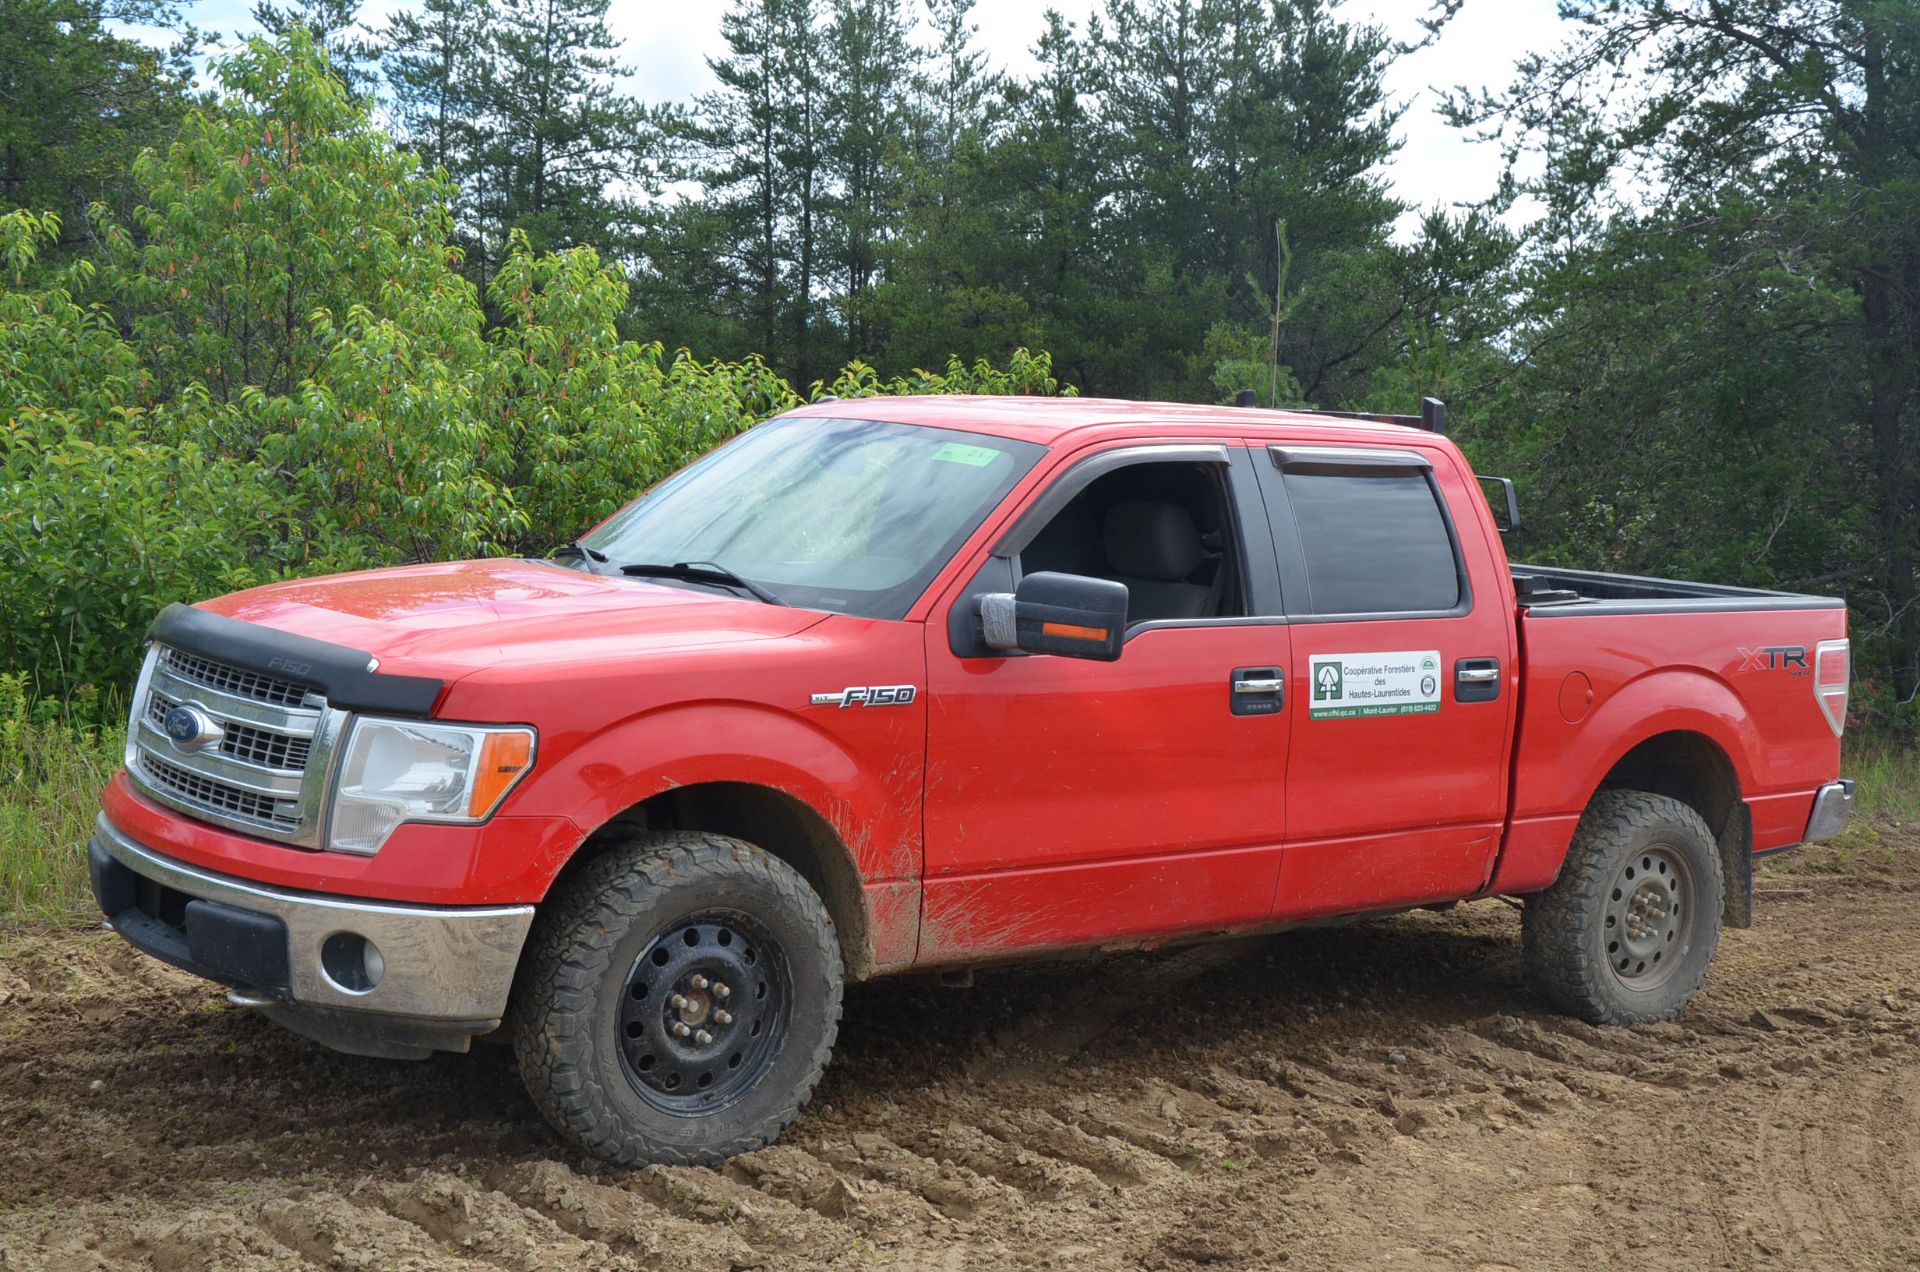 FORD (2013) F150 XLT CREW CAB PICKUP TRUCK WITH 5.0LITER V8 GAS ENGINE, AUTO TRANSMISSION, 4X4,